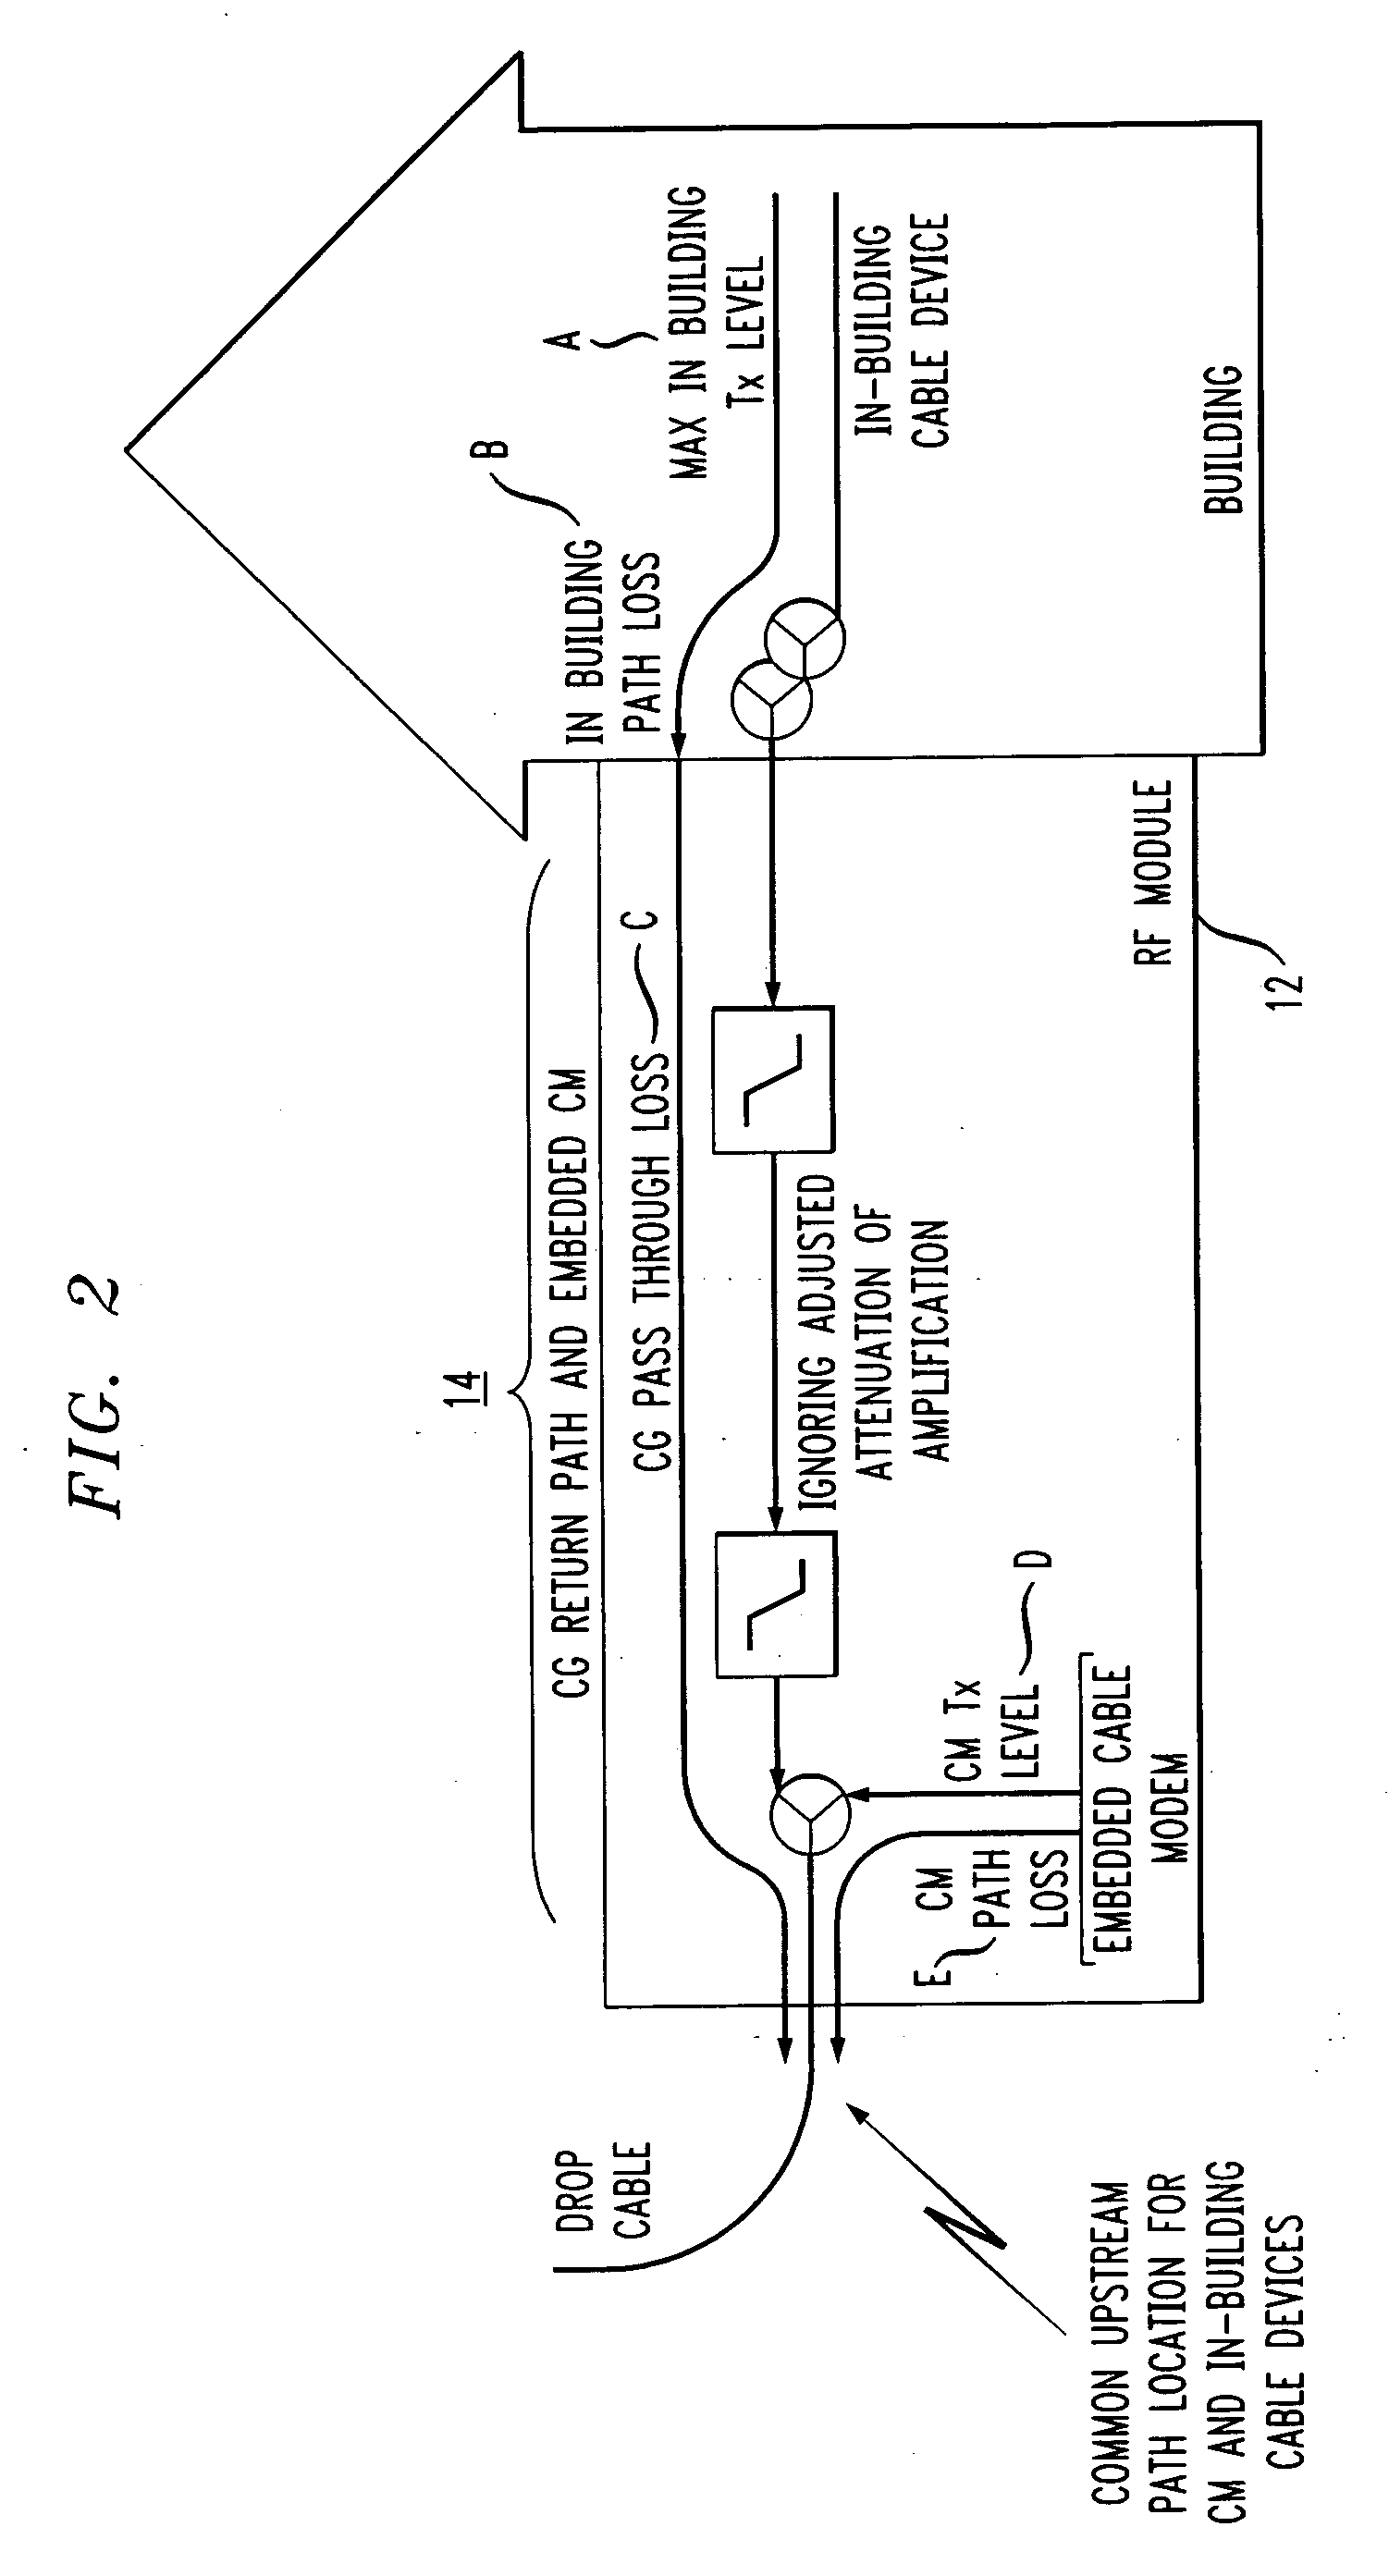 Dynamic upstream attenuation for ingress noise reduction